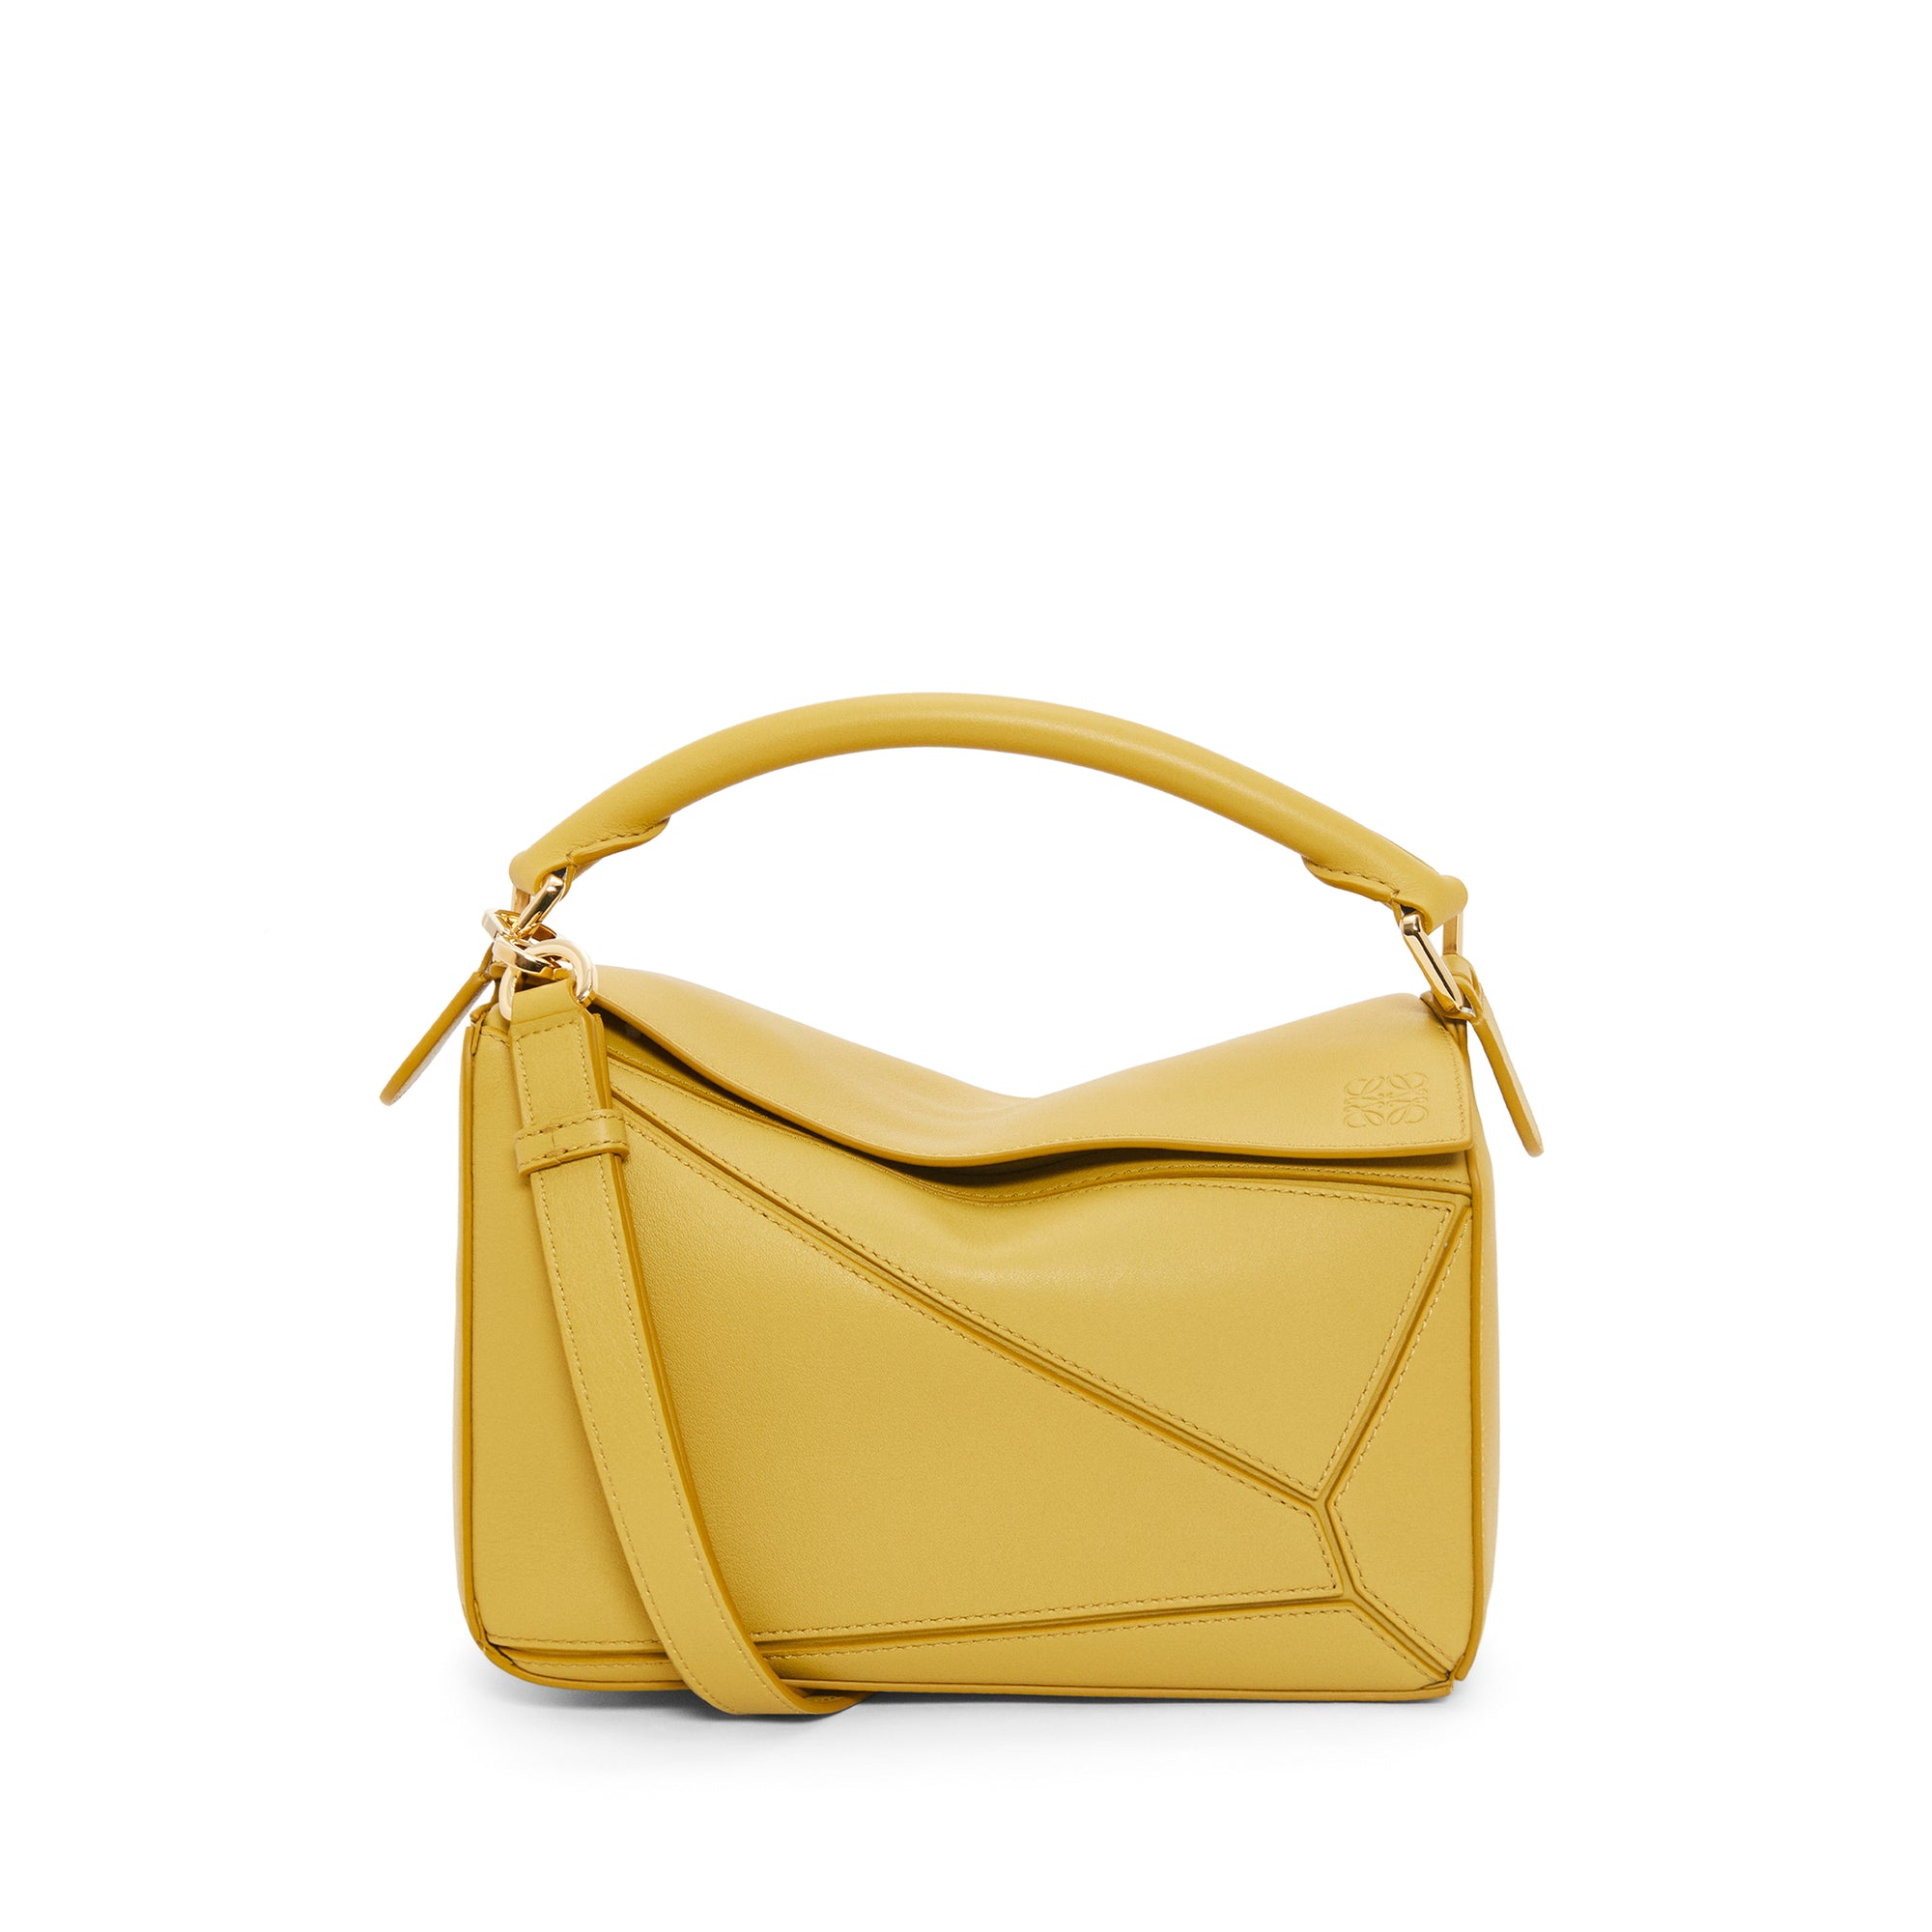 Loewe - Women’s Puzzle Small Bag - (Bright Ochre) view 1